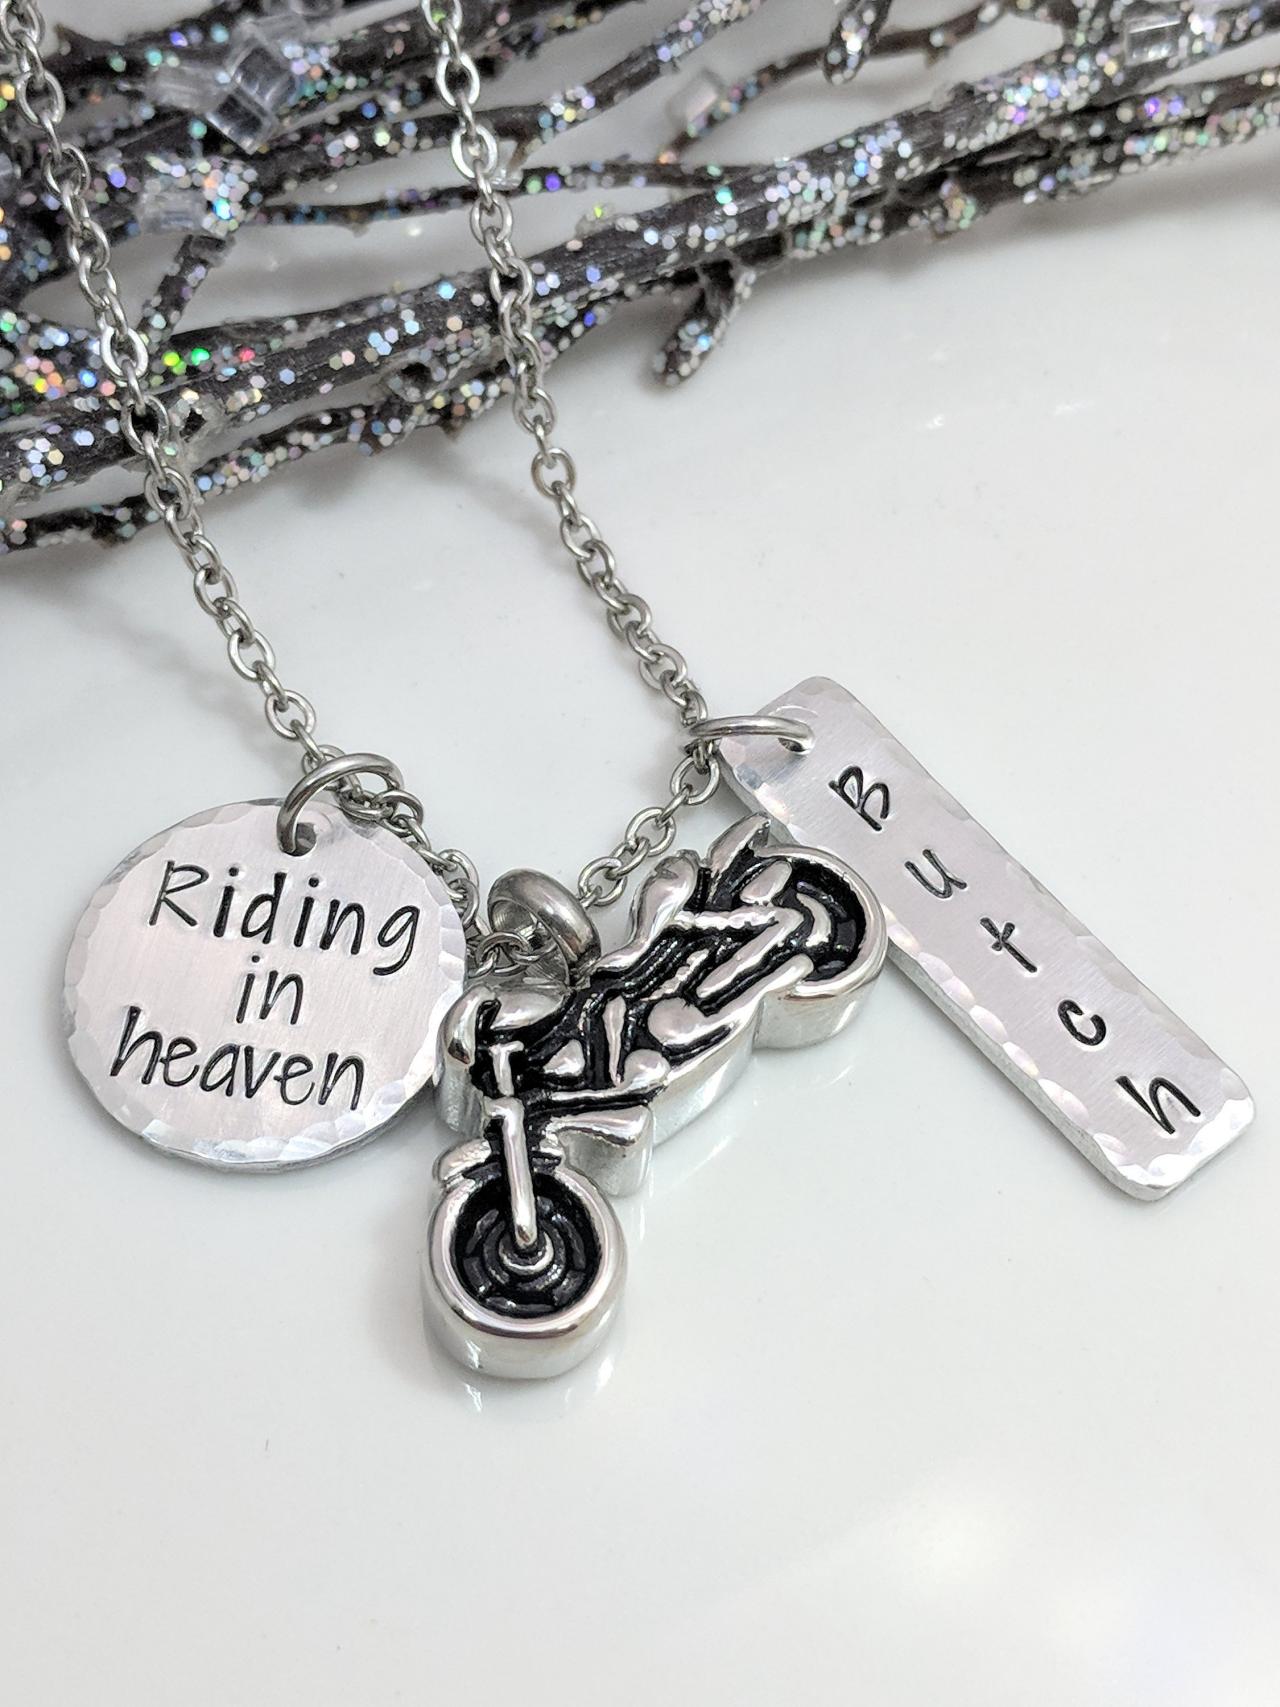 Hand Stamped Necklace Motorcycle Urn - Hand Stamped Keepsake Jewelry -p Ersonalized Urn Necklace - Riding In Heaven - Ashes Urn - Urn For Ashes -